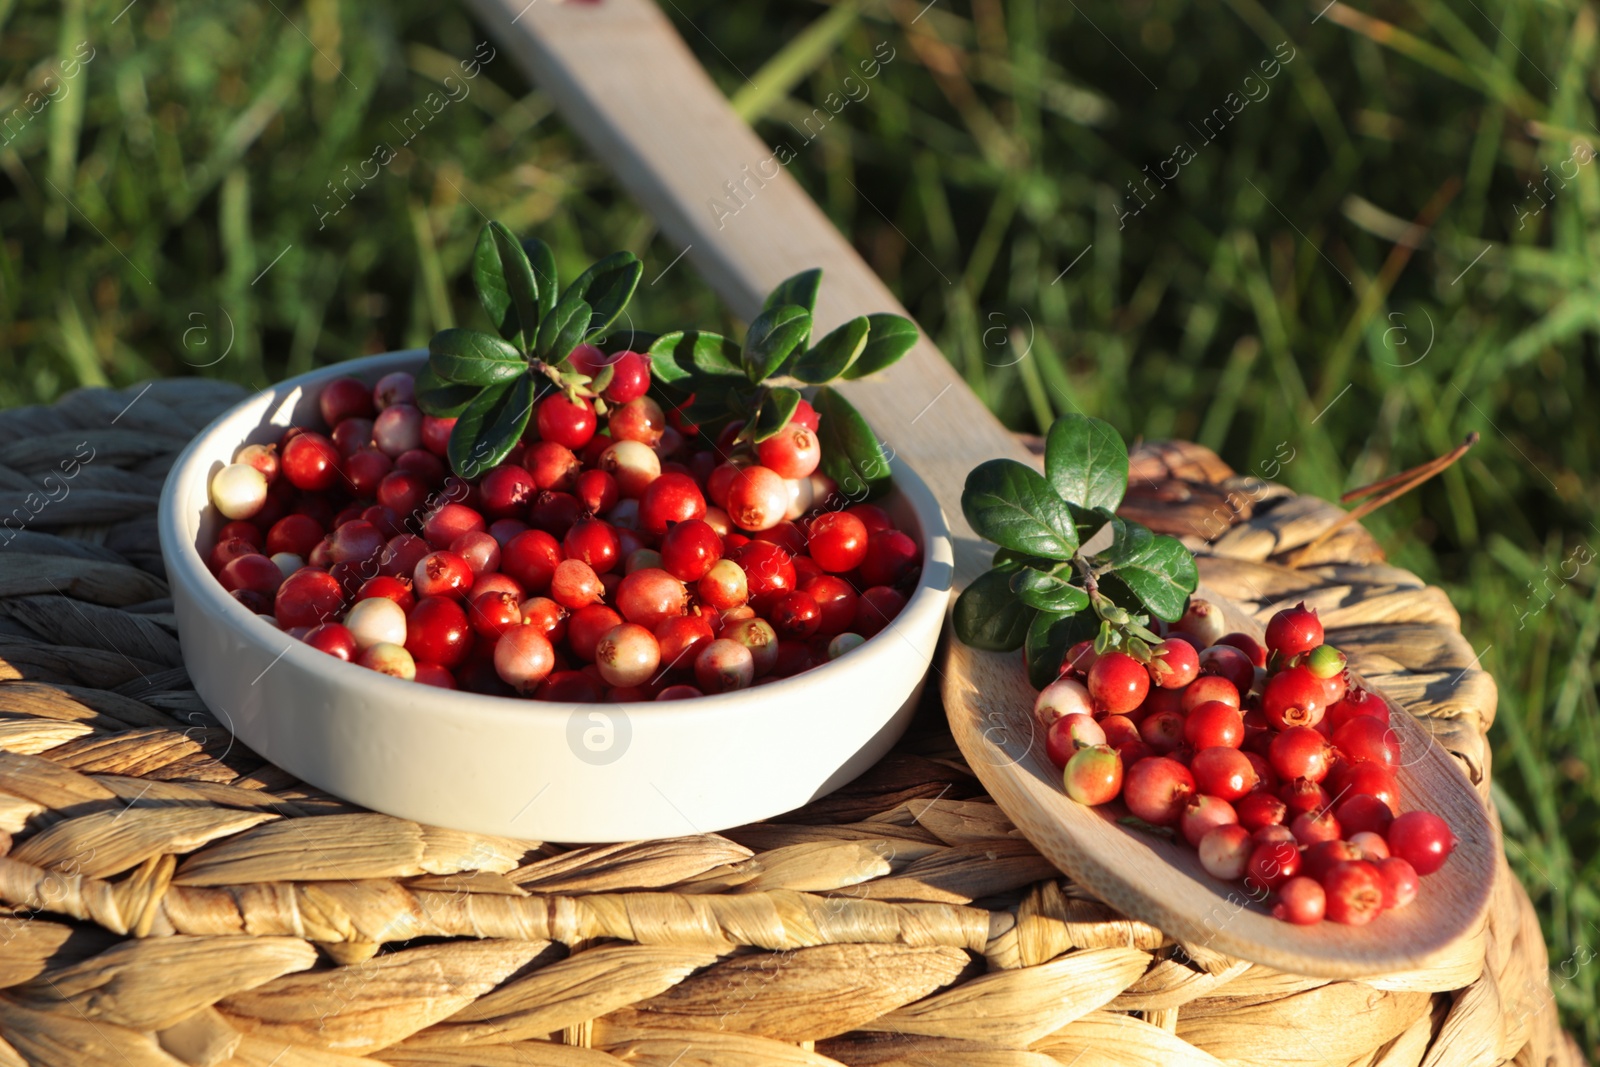 Photo of Delicious ripe red lingonberries in bowl and wooden spoon on wicker basket outdoors